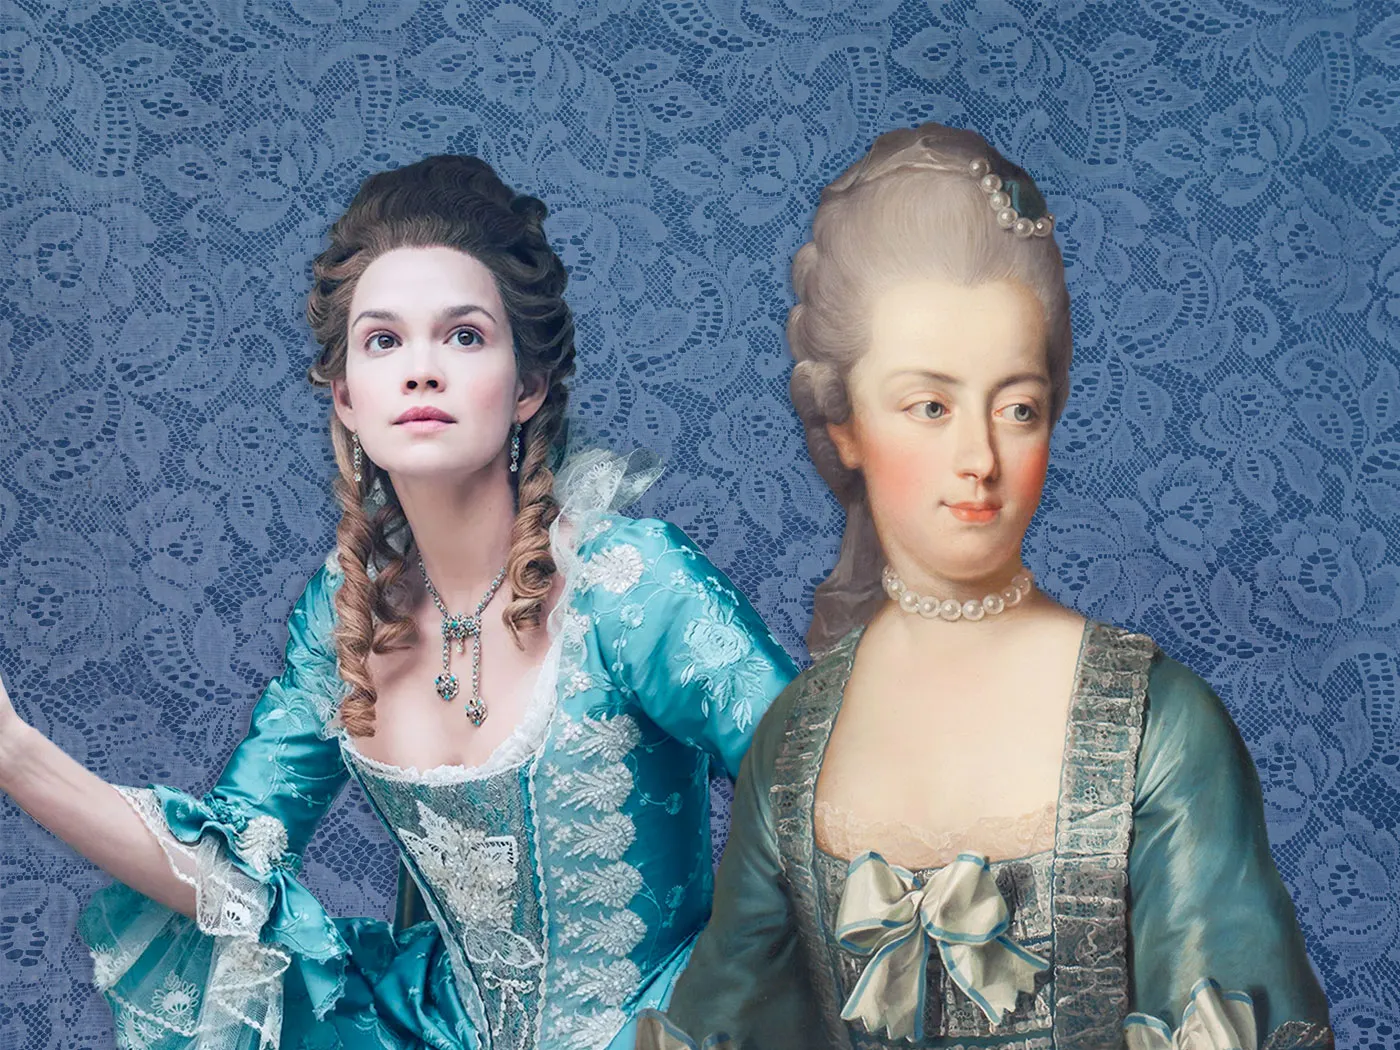 Why Marie Antoinette's Reputation Changes With Each Generation